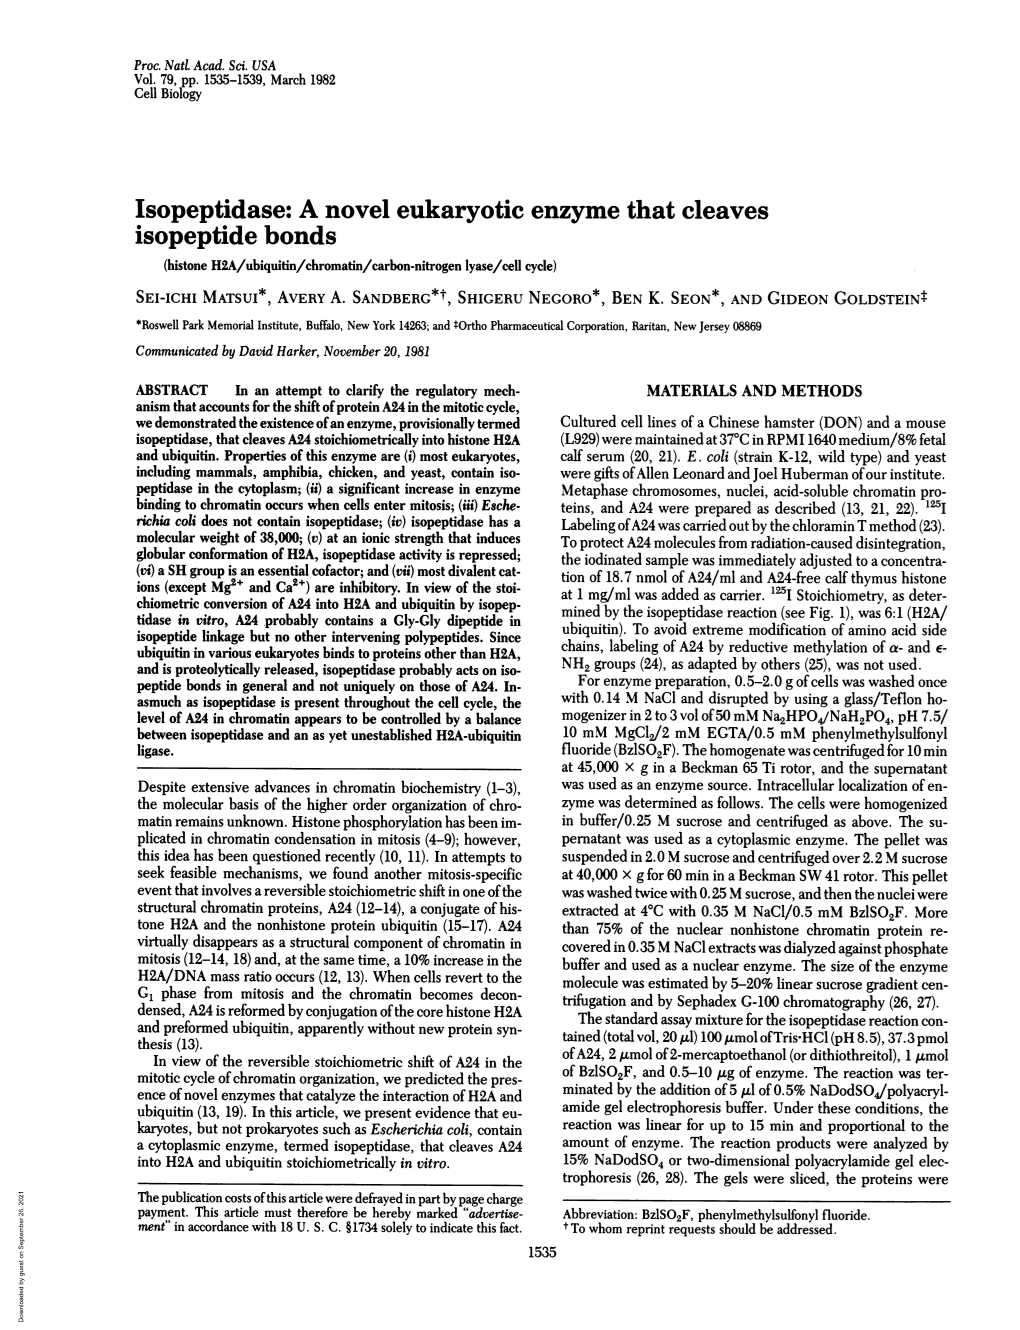 Isopeptidase: a Novel Eukaryotic Enzyme That Cleaves Isopeptide Bonds (Histone H2A/Ubiquitin/Chromatin/Carbon-Nitrogen Lyase/Cell Cycle) SEI-ICHI MATSUI*, AVERY A